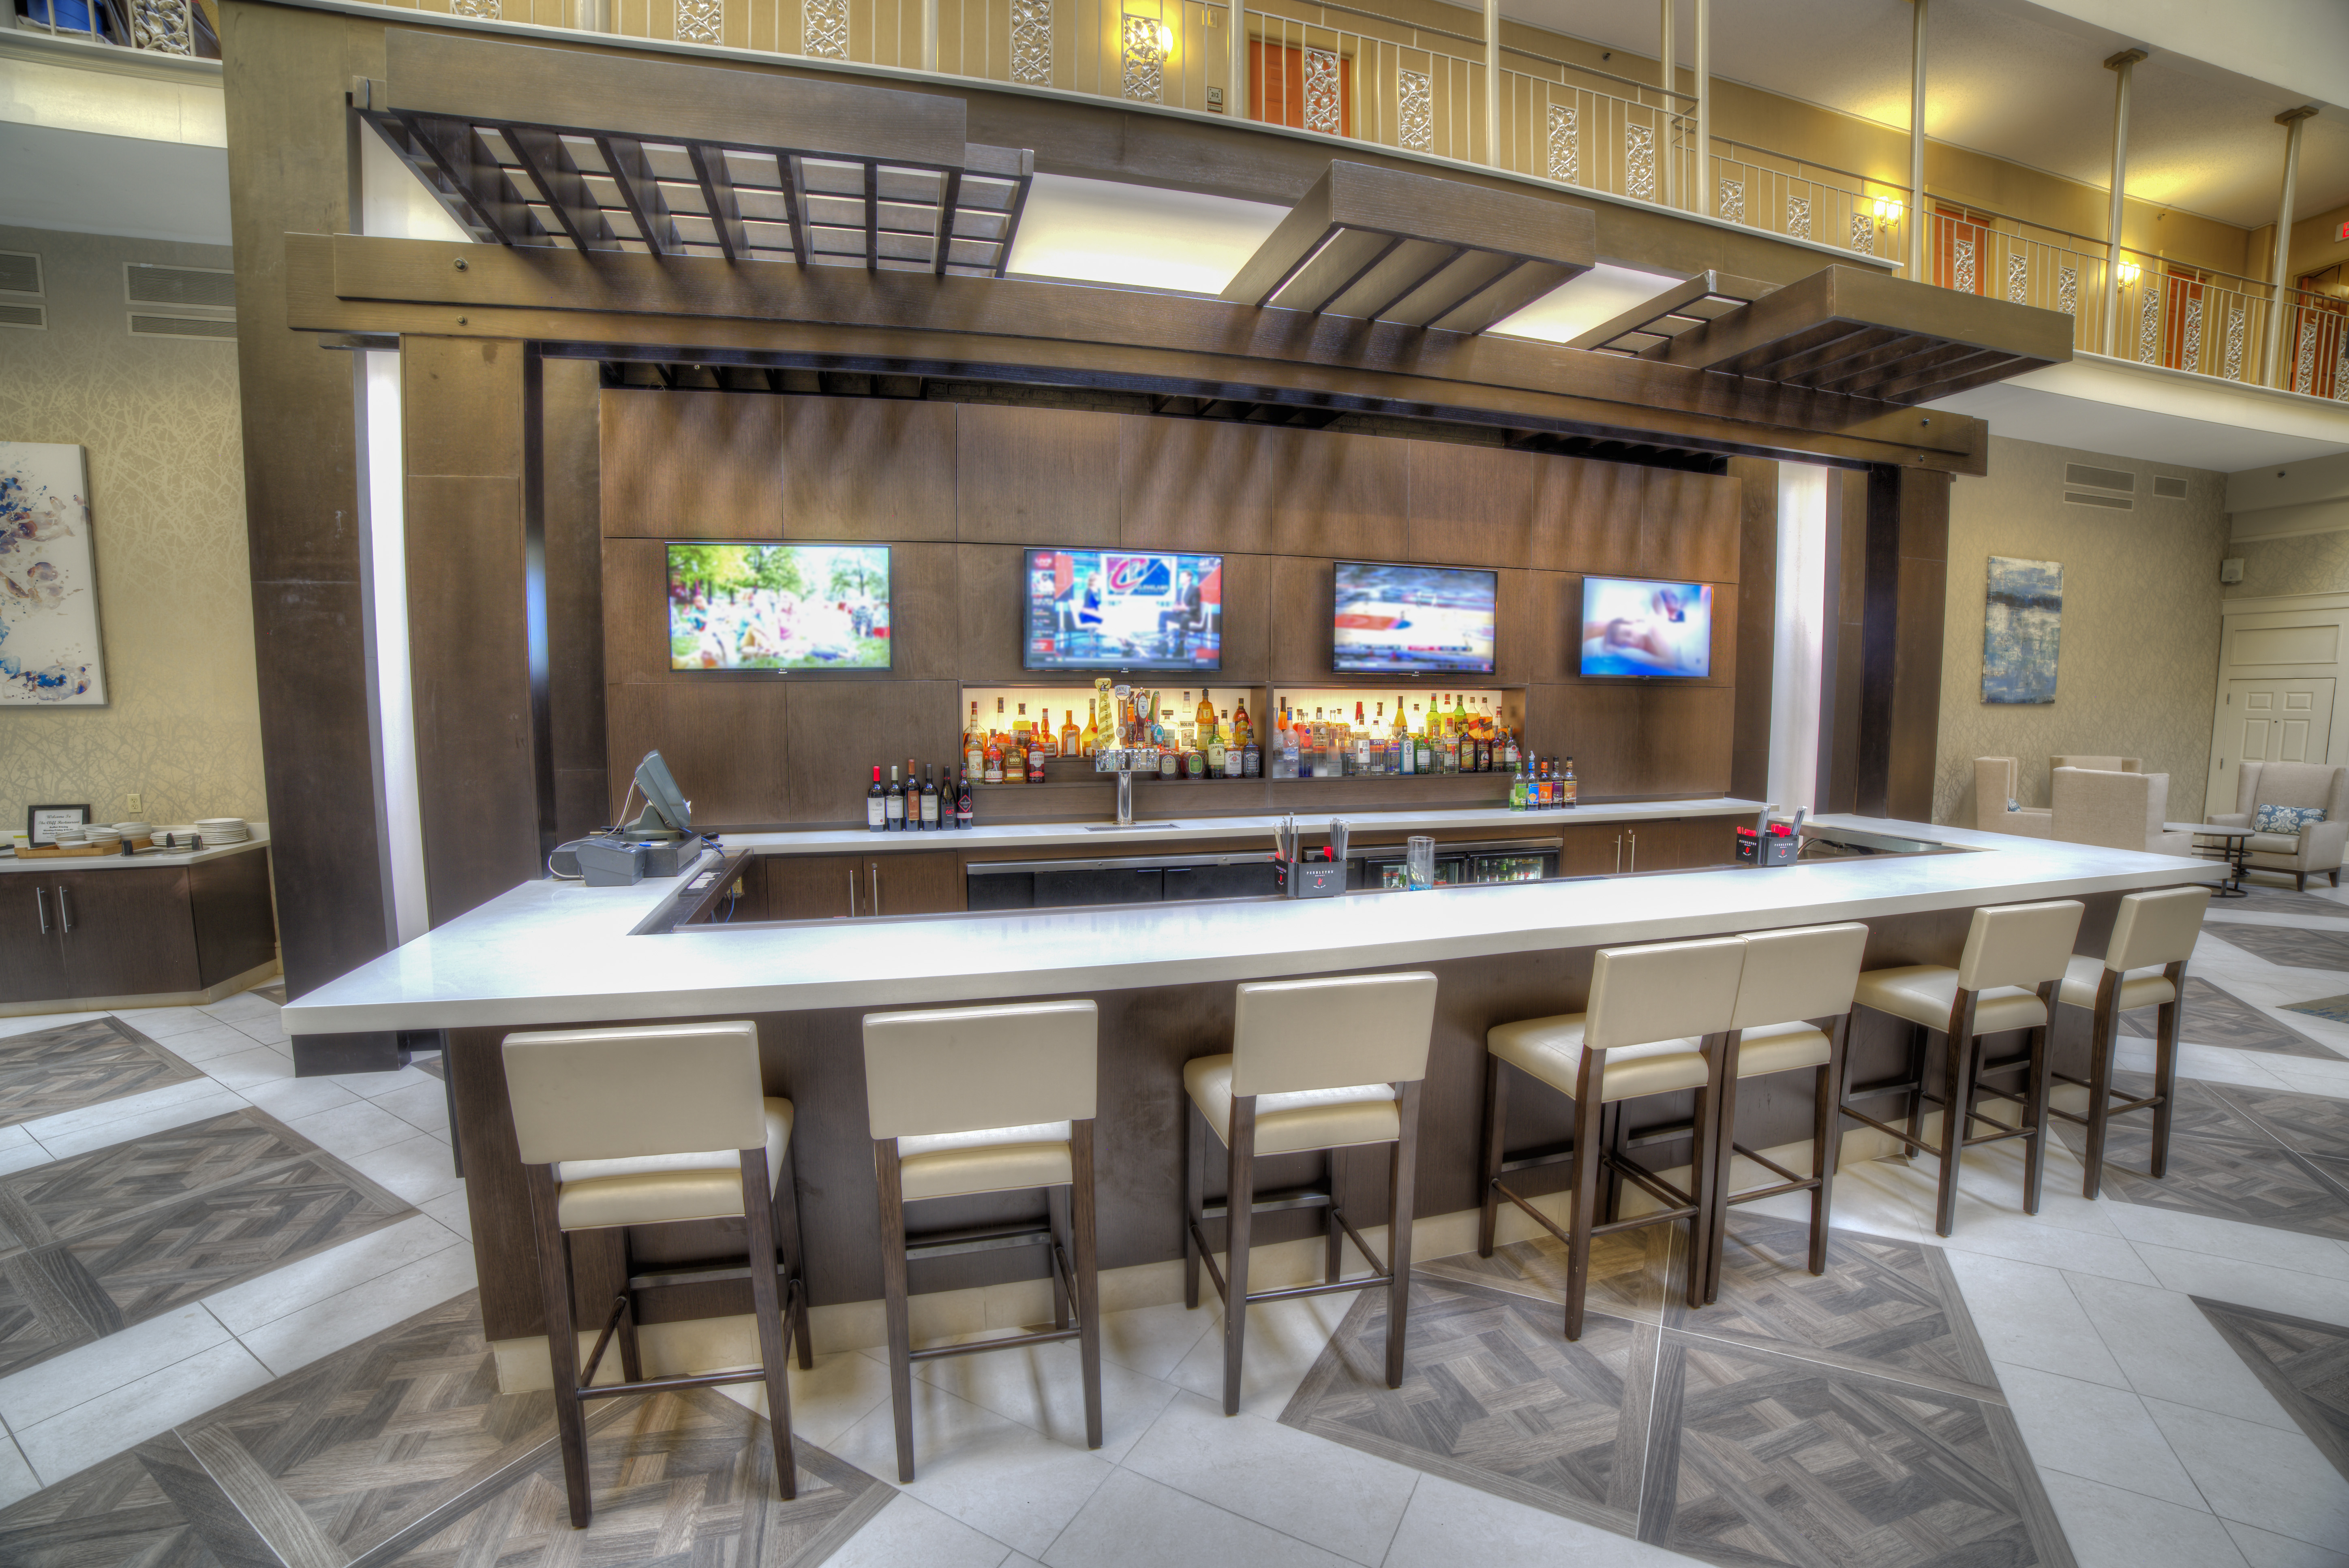 Fully Stocked Lobby Bar With Four TVs and Counter Seating